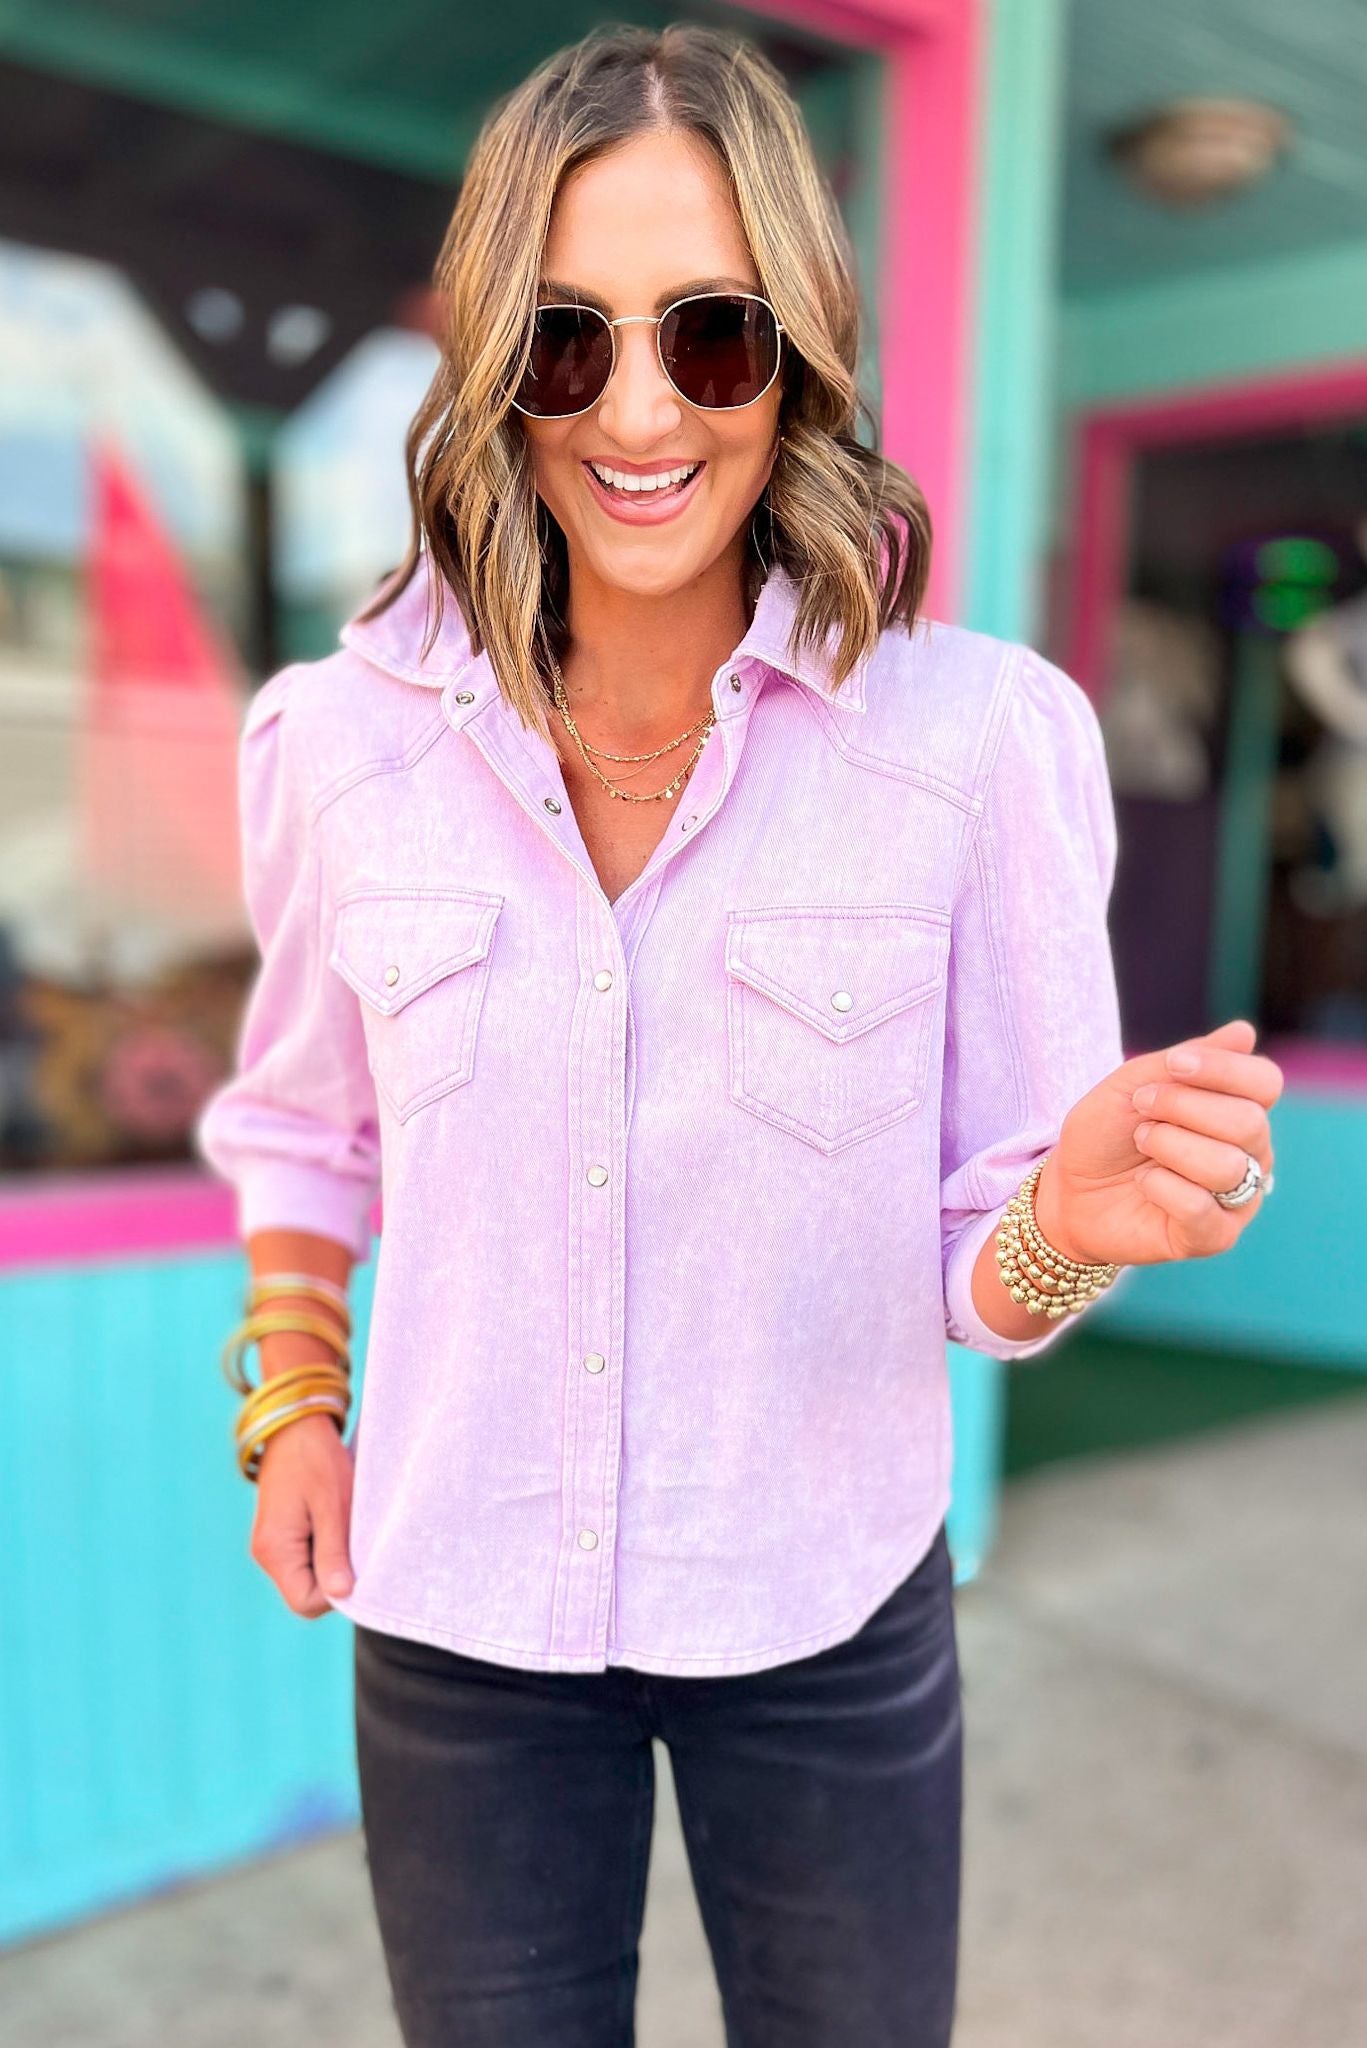 Load image into Gallery viewer, SSYS Exclusive Lavender Denim Pearl Snap Long Sleeve Top, denim long sleeve top, lavender, pearl snap detail, transition piece, must have, fort worth fall, shop style your senses by mallory fitzsimmons
